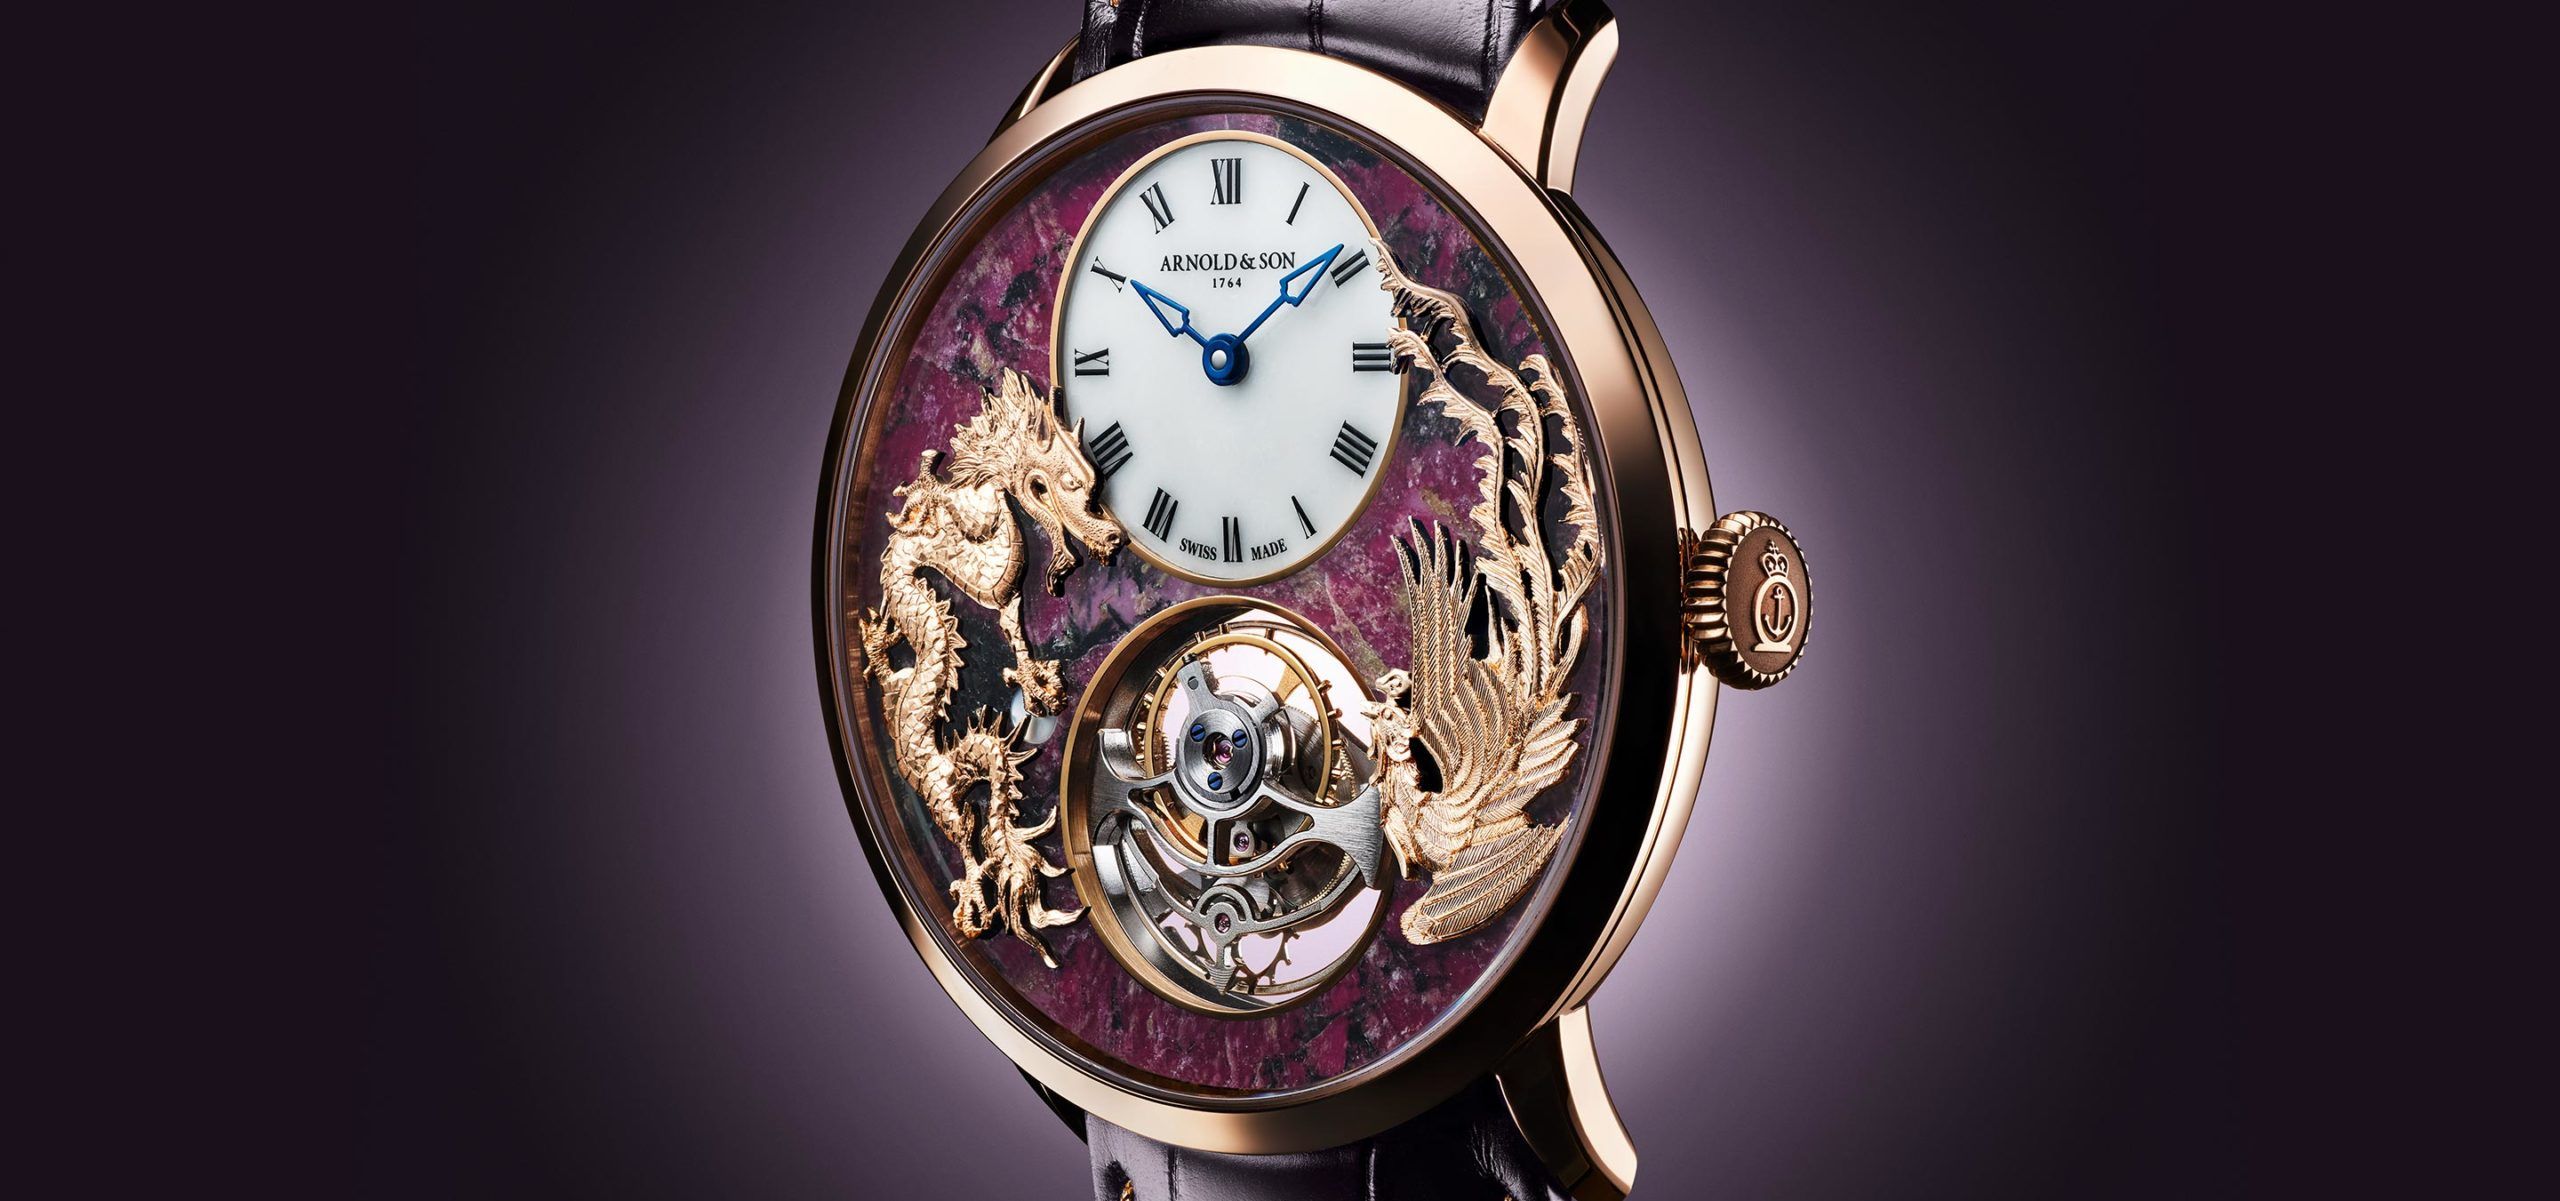 Legends In Stone: Presenting The Arnold & Son Ultrathin Tourbillon Dragon And Phoenix Watches